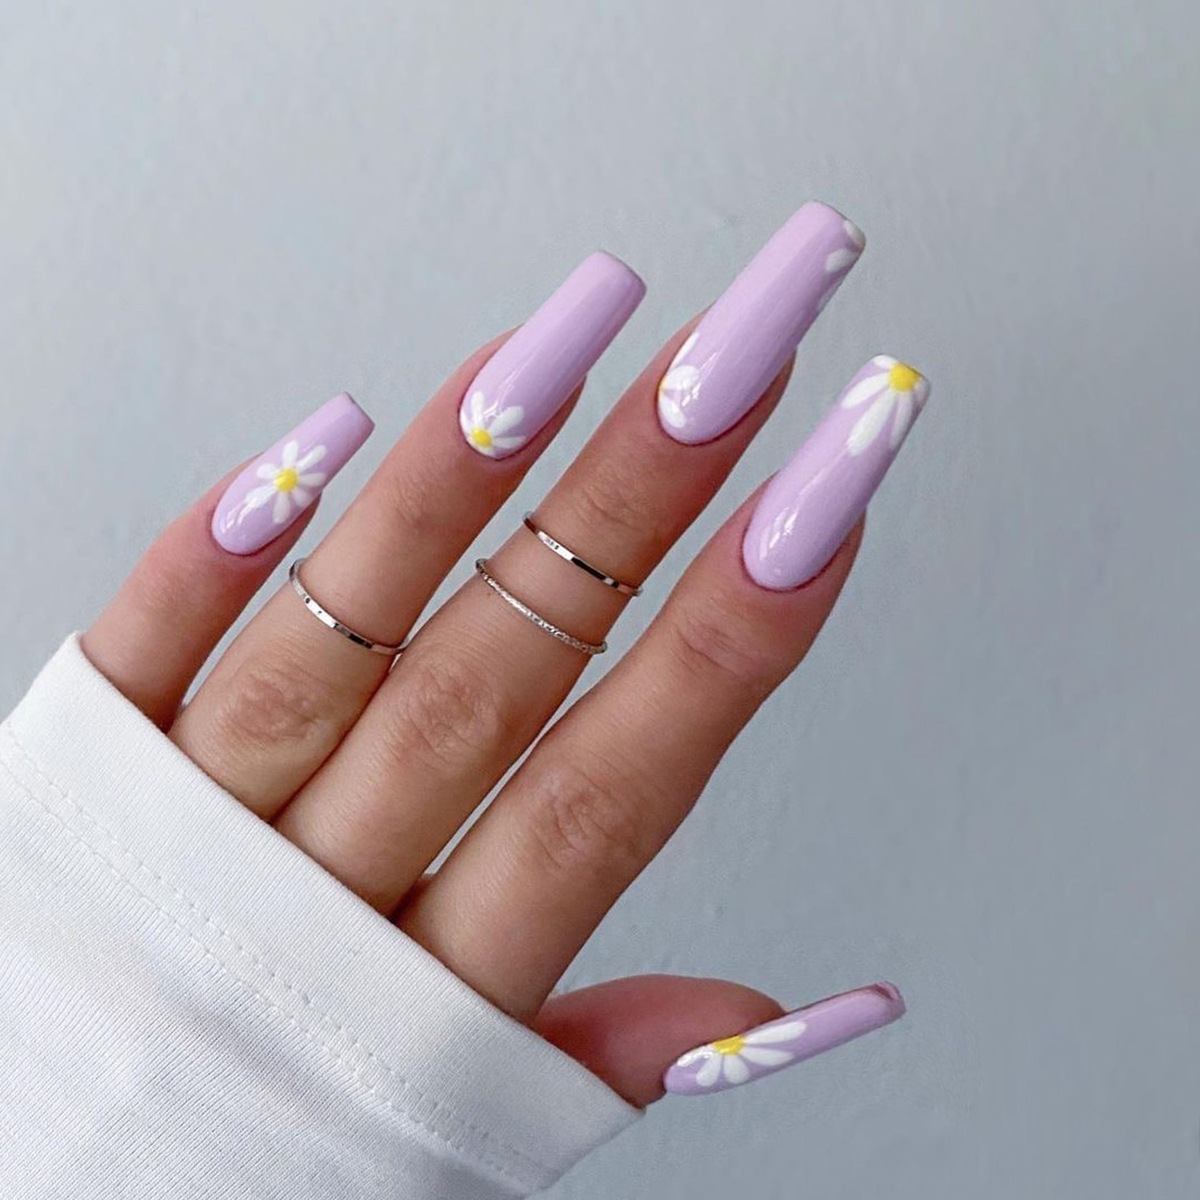 24pcs/box Press On False Nails Long Trapezoid Daisy Broken Flowers Wearable Fakse Nails With Glue and Wearing Tools As Gift